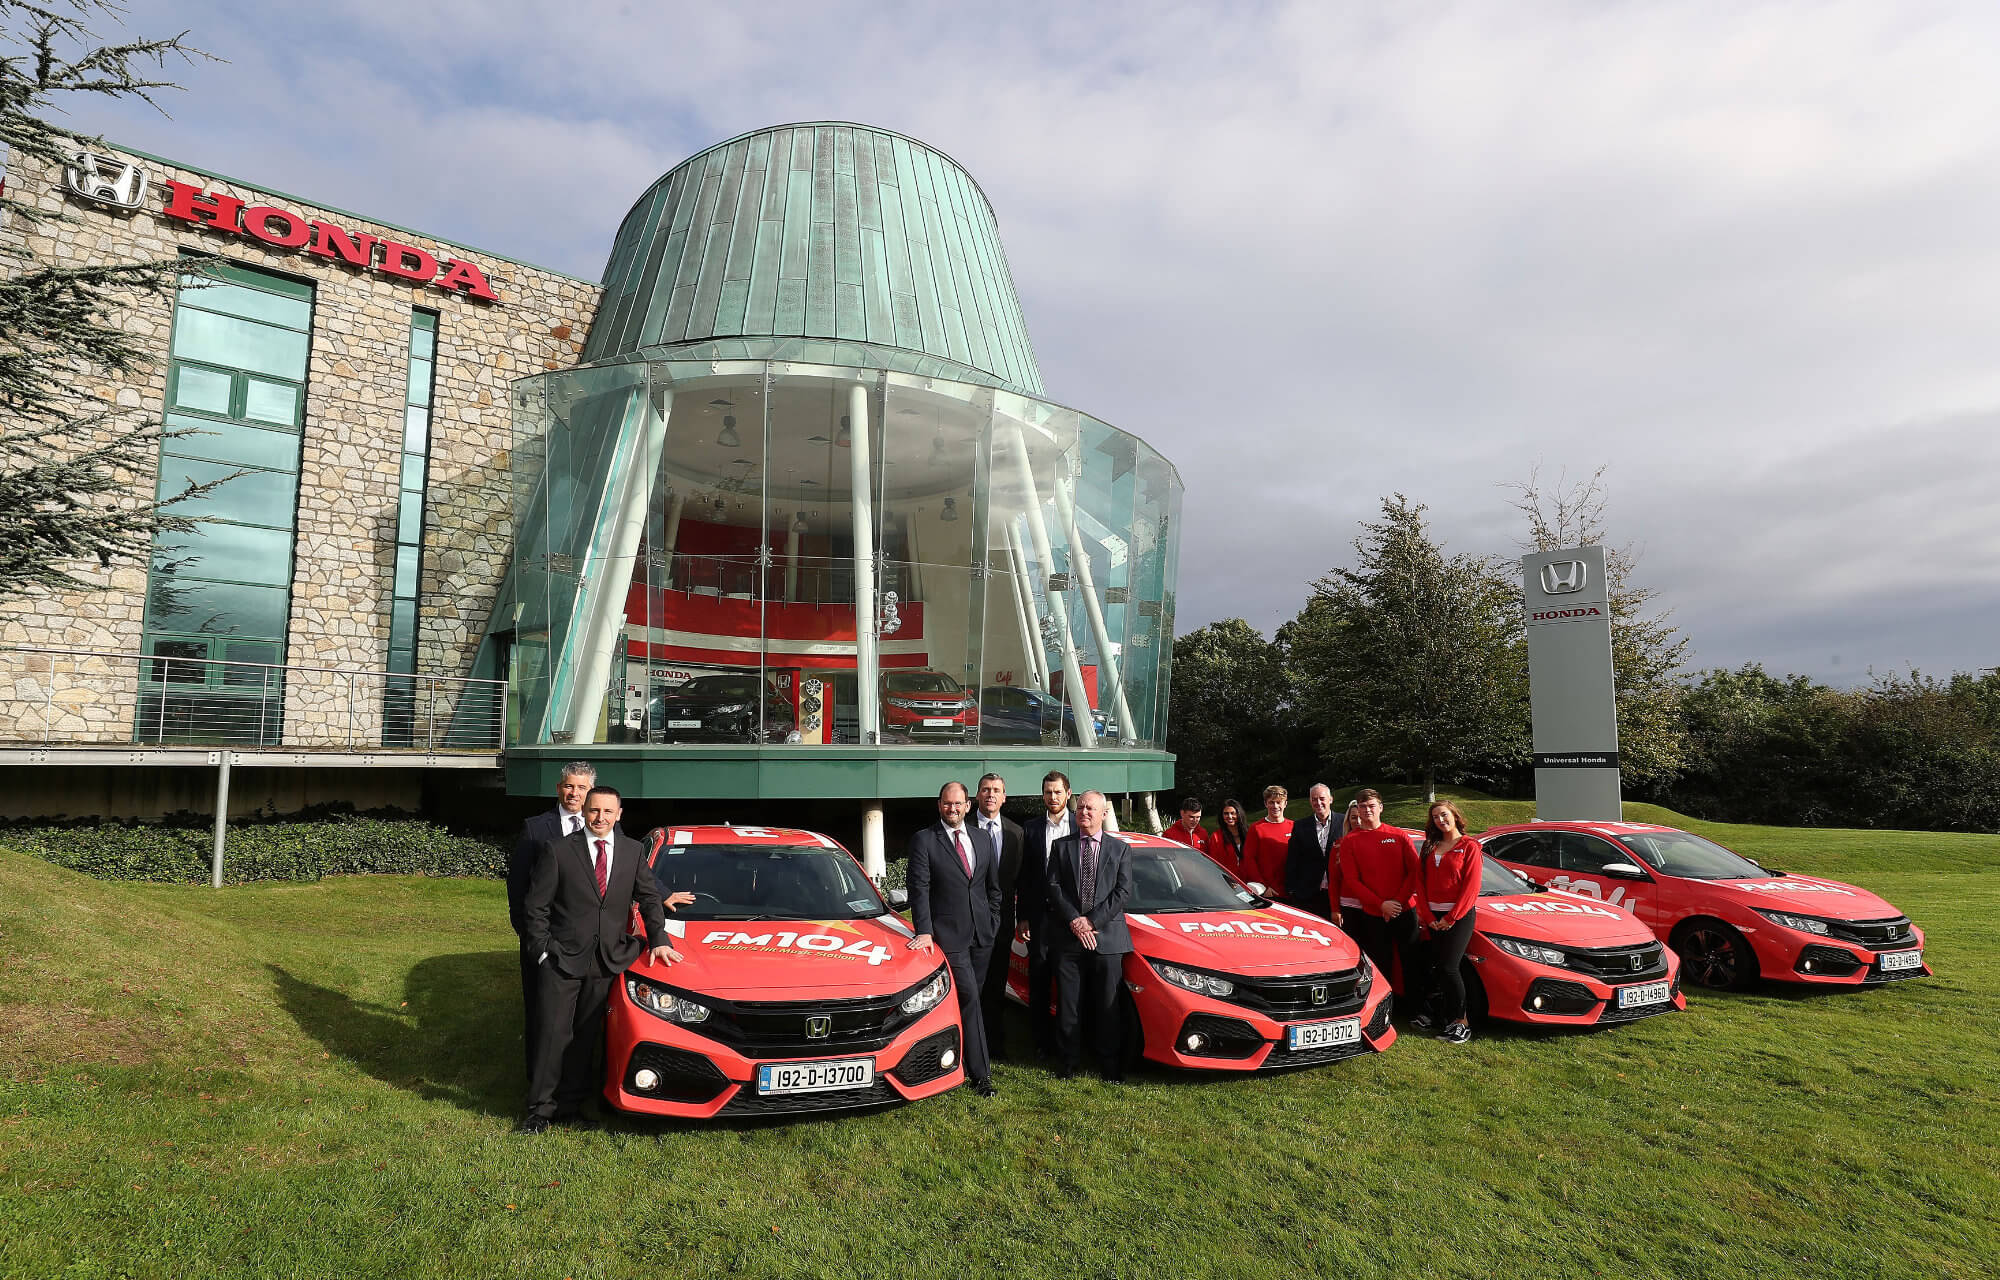 FM104 unveils new promotional team with Honda Civic